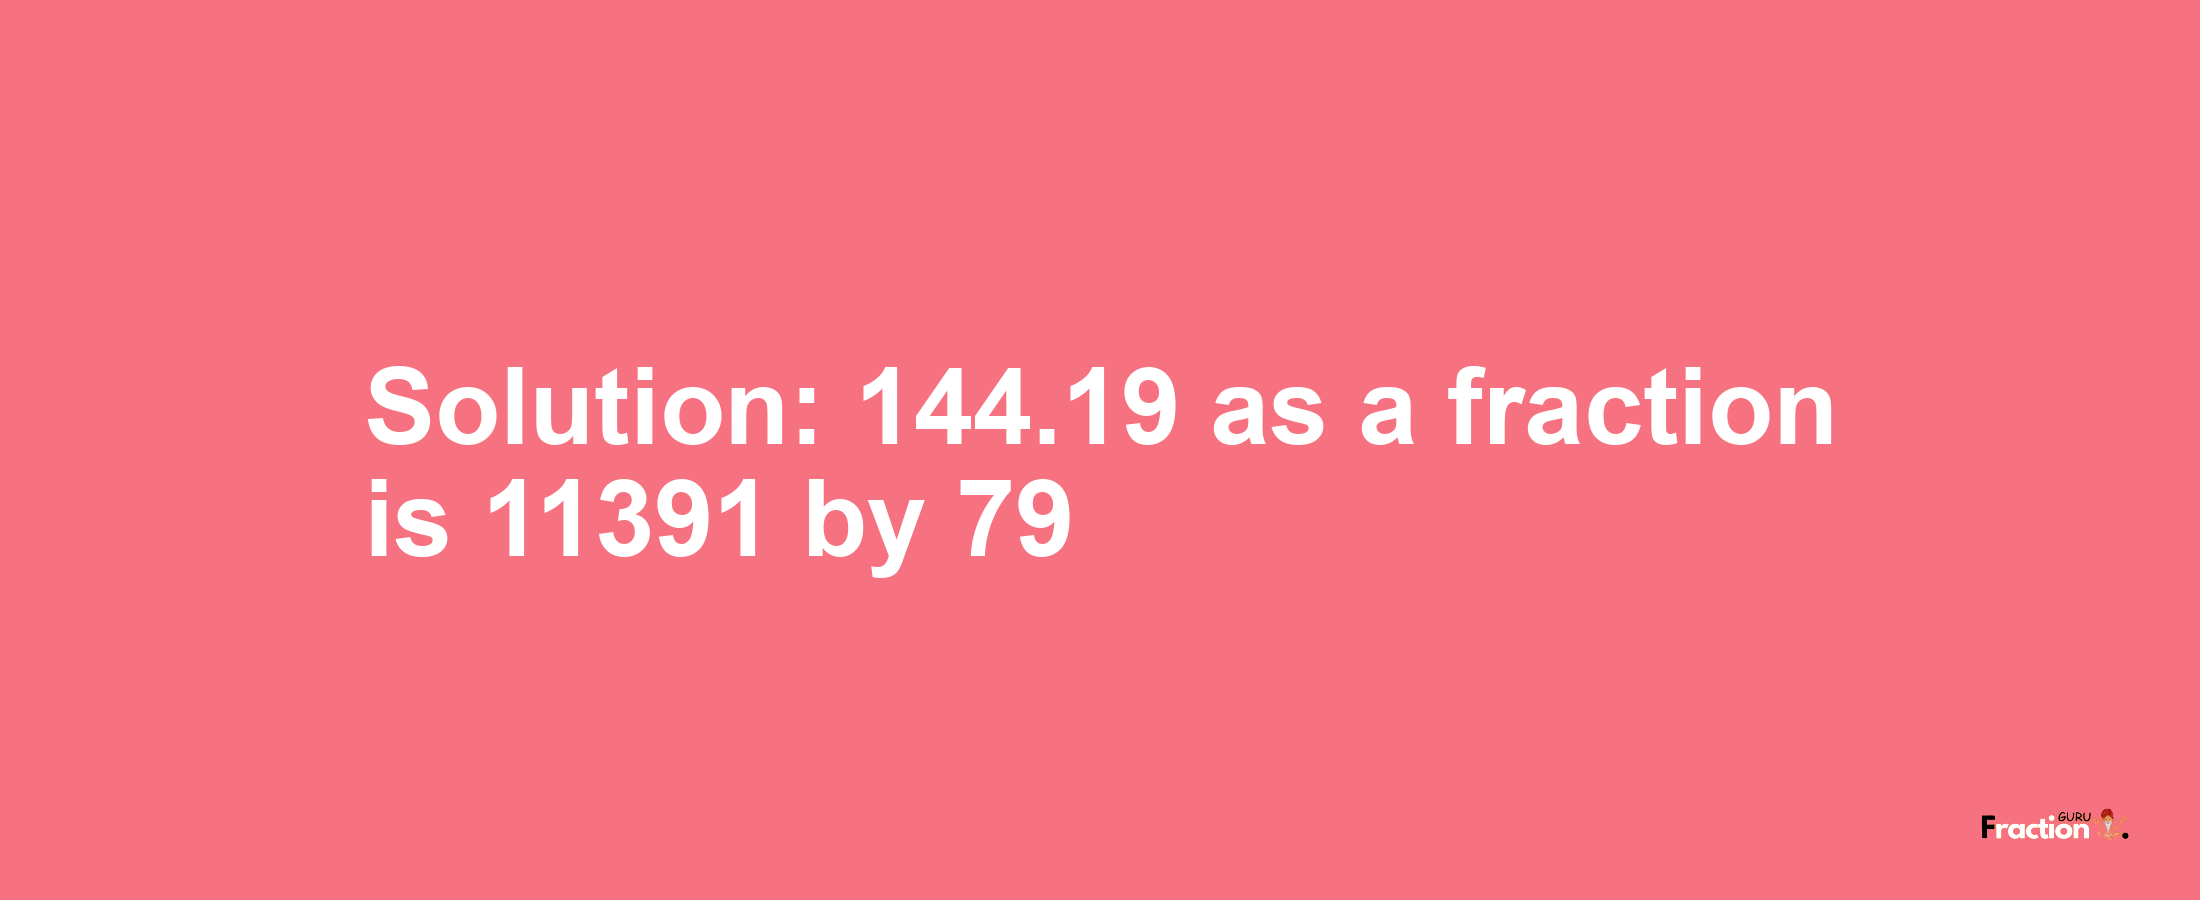 Solution:144.19 as a fraction is 11391/79